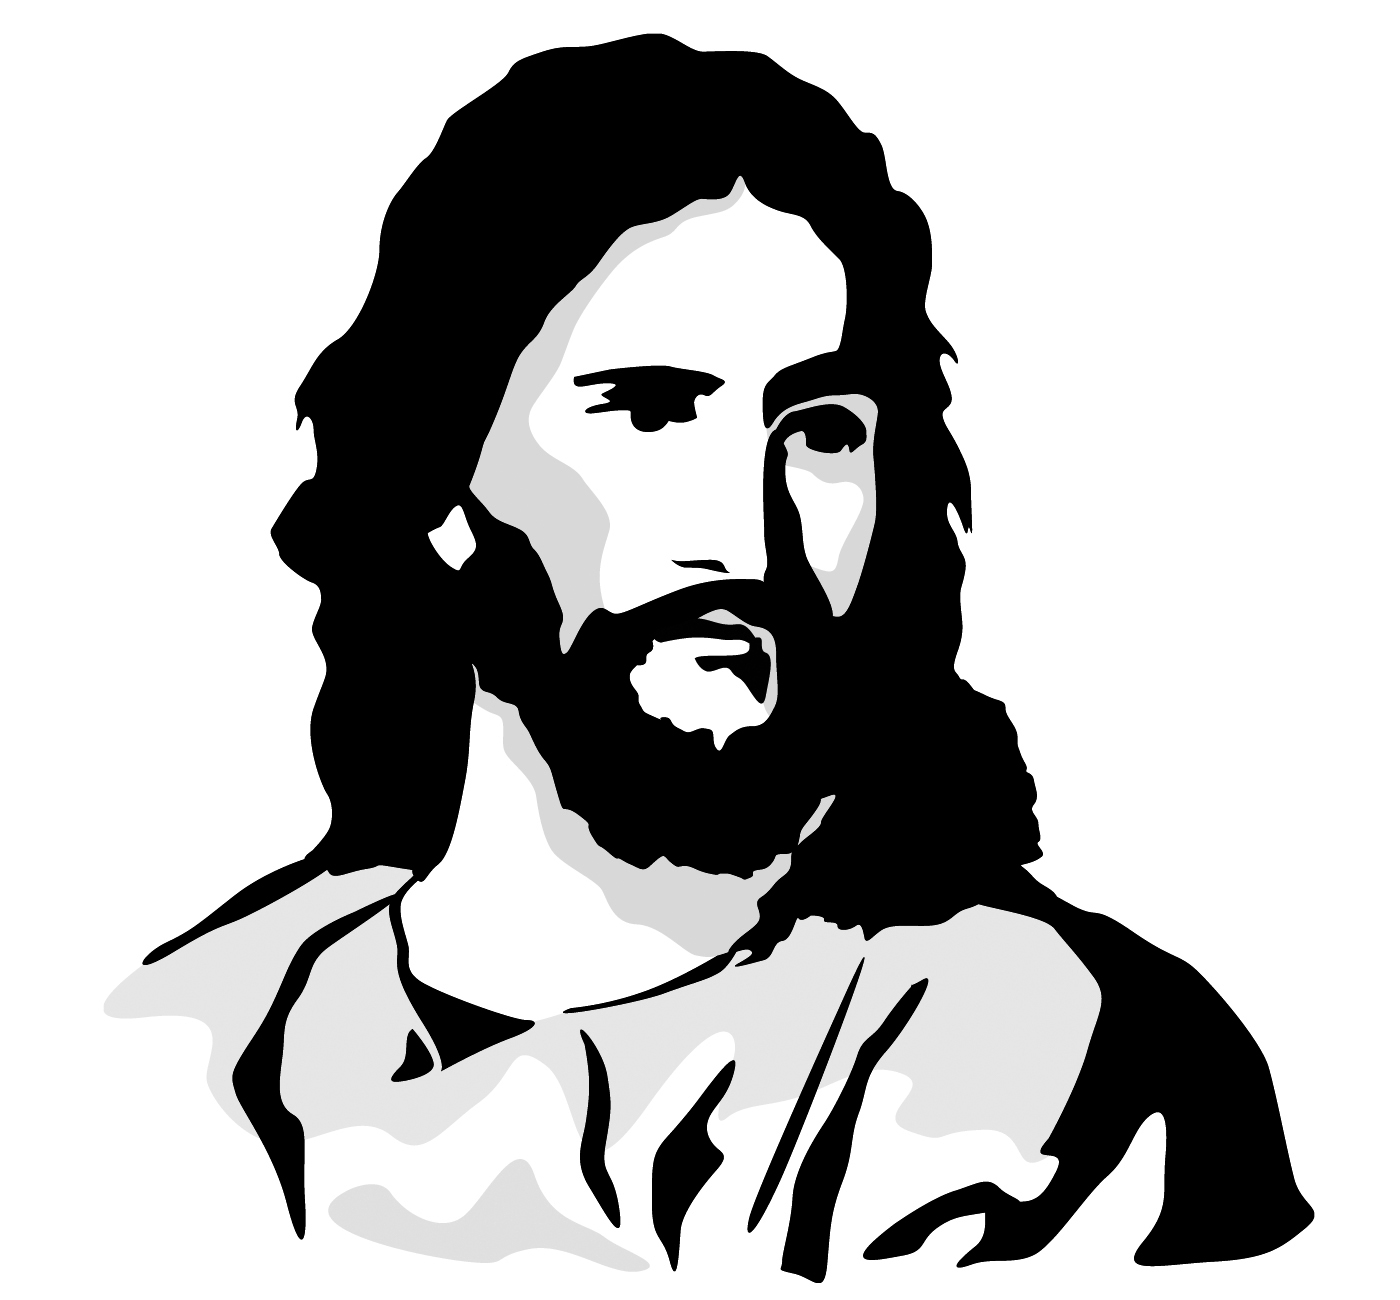 Clip Art Of Jesus - Clipart library